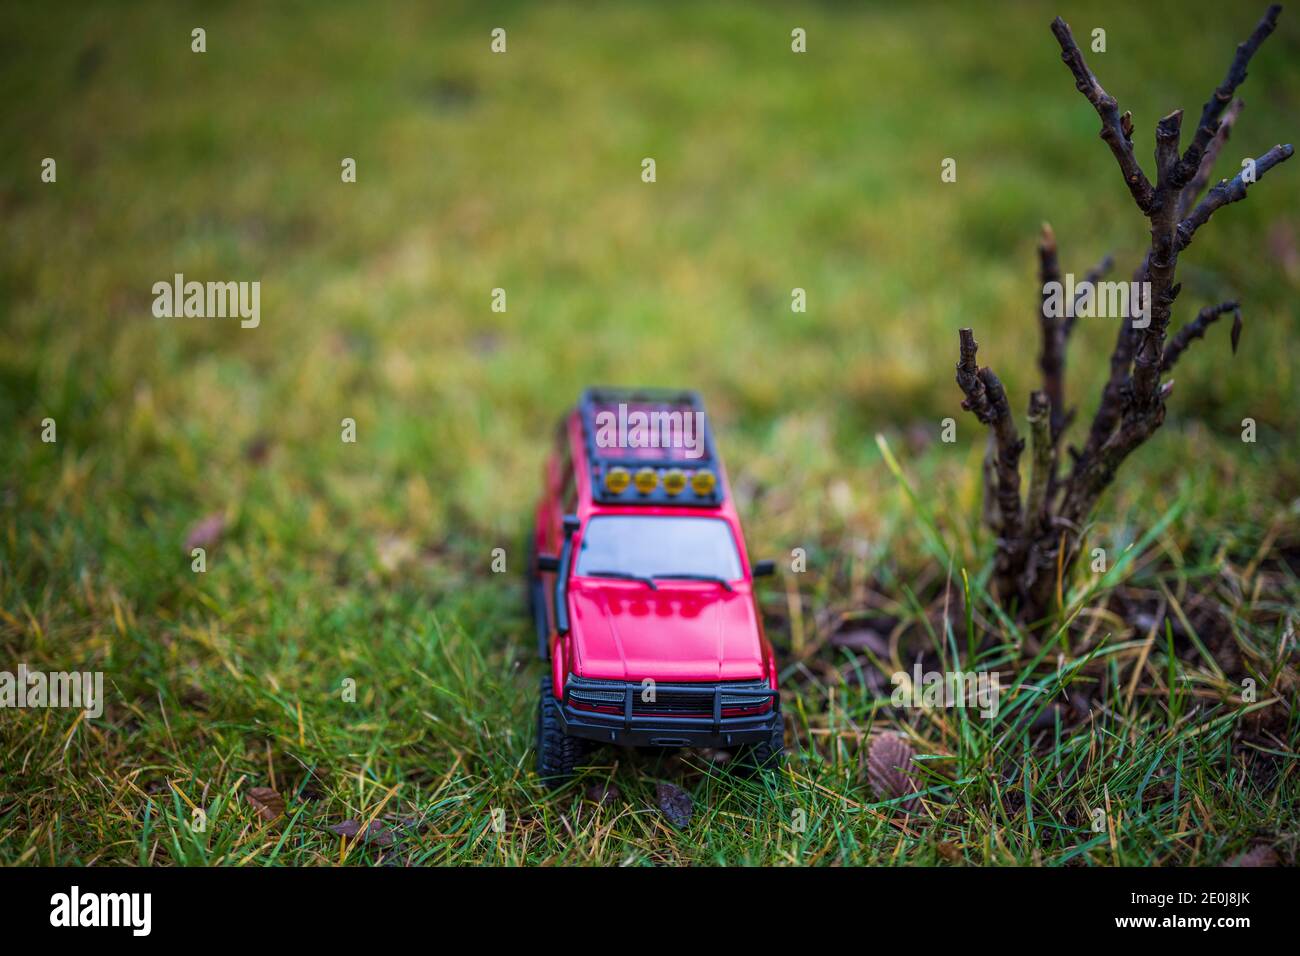 Beautiful view of  model car on lawn. Free time Children and adults concept. Stock Photo